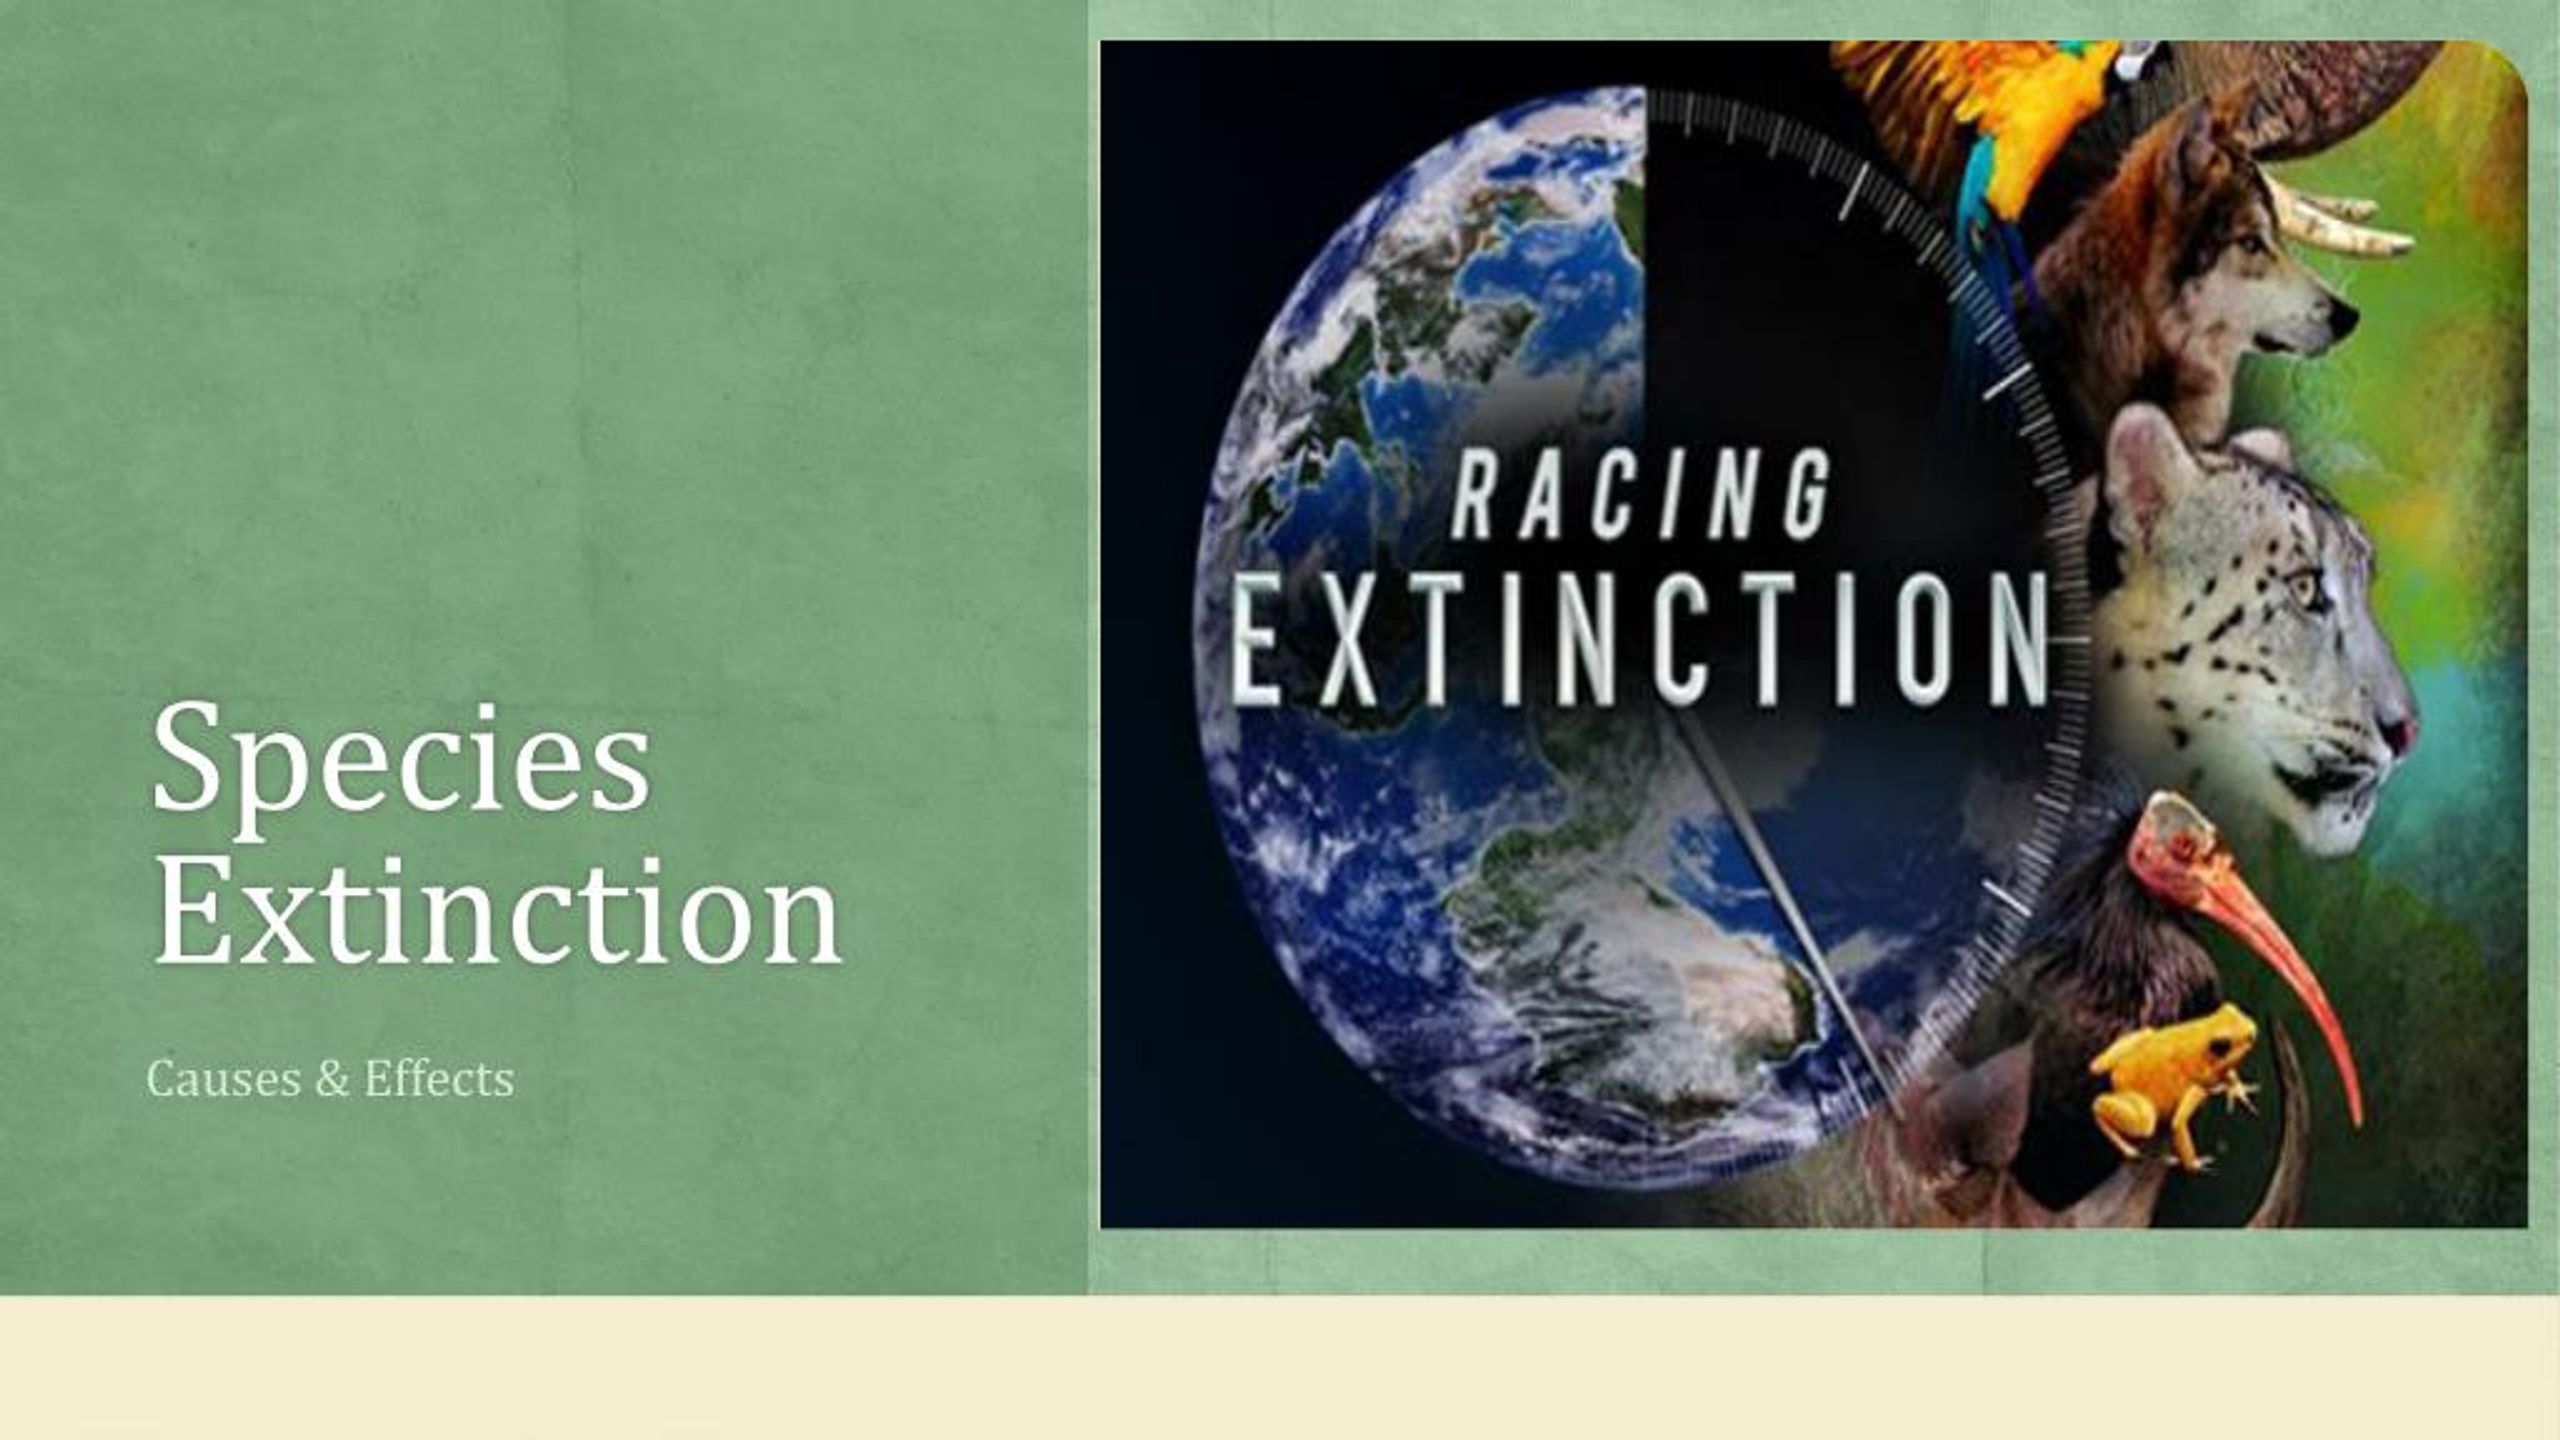 PPT - Species Extinction- Reasons and Effects? PowerPoint Presentation